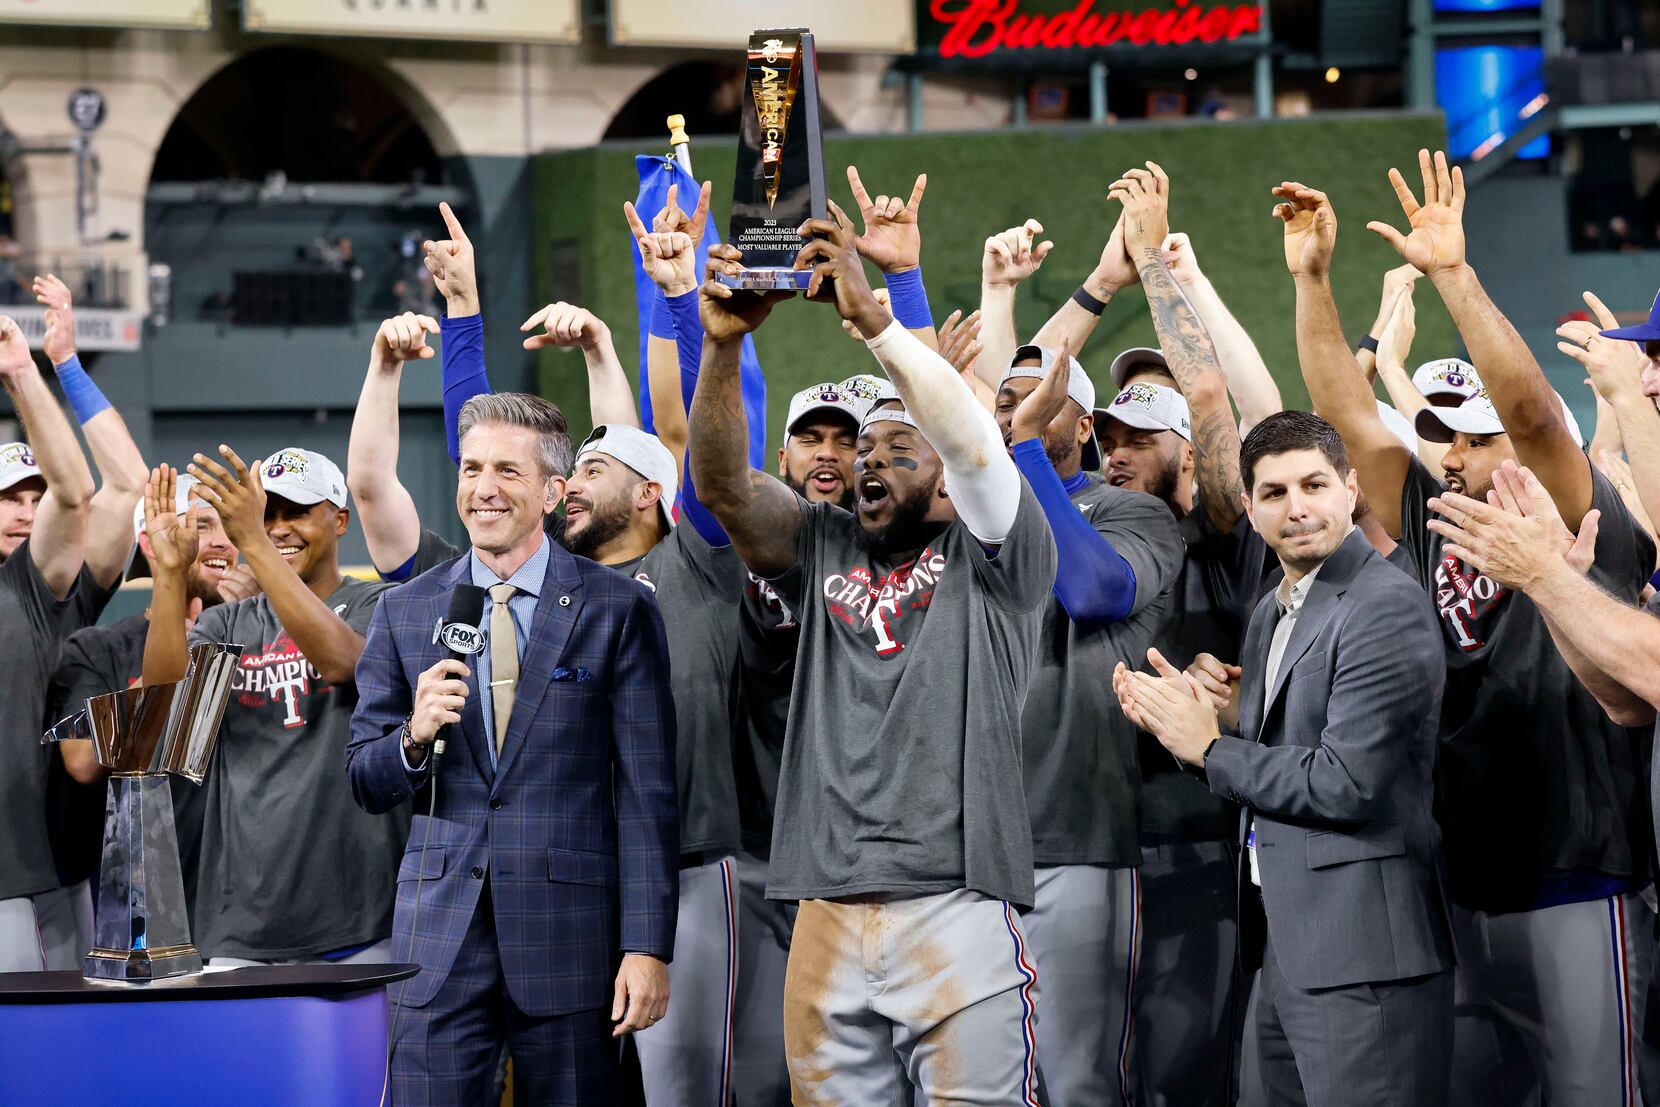 Rangers in rebuilding mode decade after only 2 World Series